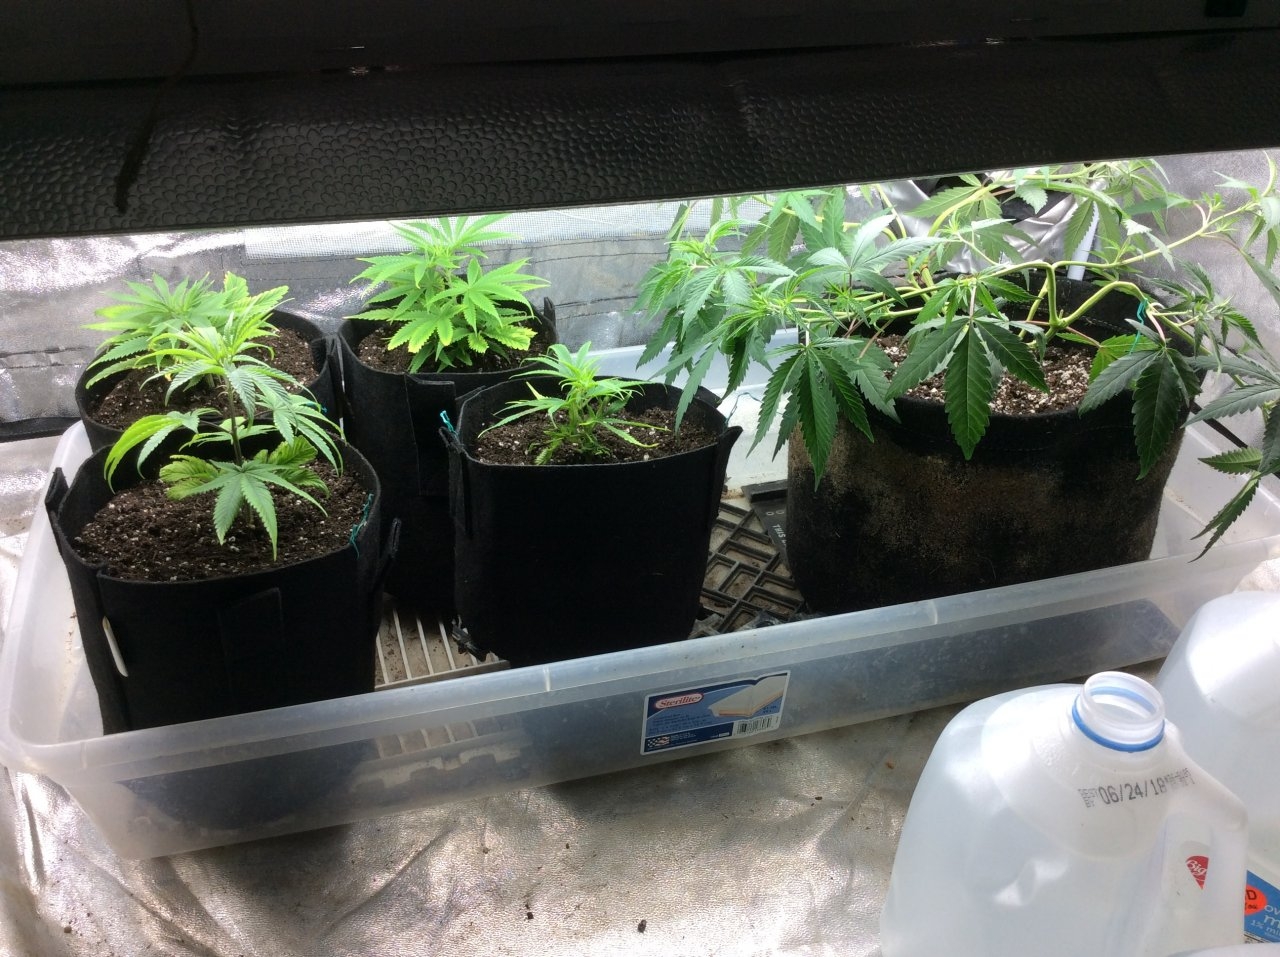 Veg. Room. 4 tops from original plants and one still in 3 gal. Bag. Haven’t completely made up my mind yet., as to what next move is. Ten weeks is a long time to wait, something new for me.162D60B3-8FEA-41DA-B5DB-1CDFA855921D.jpeg